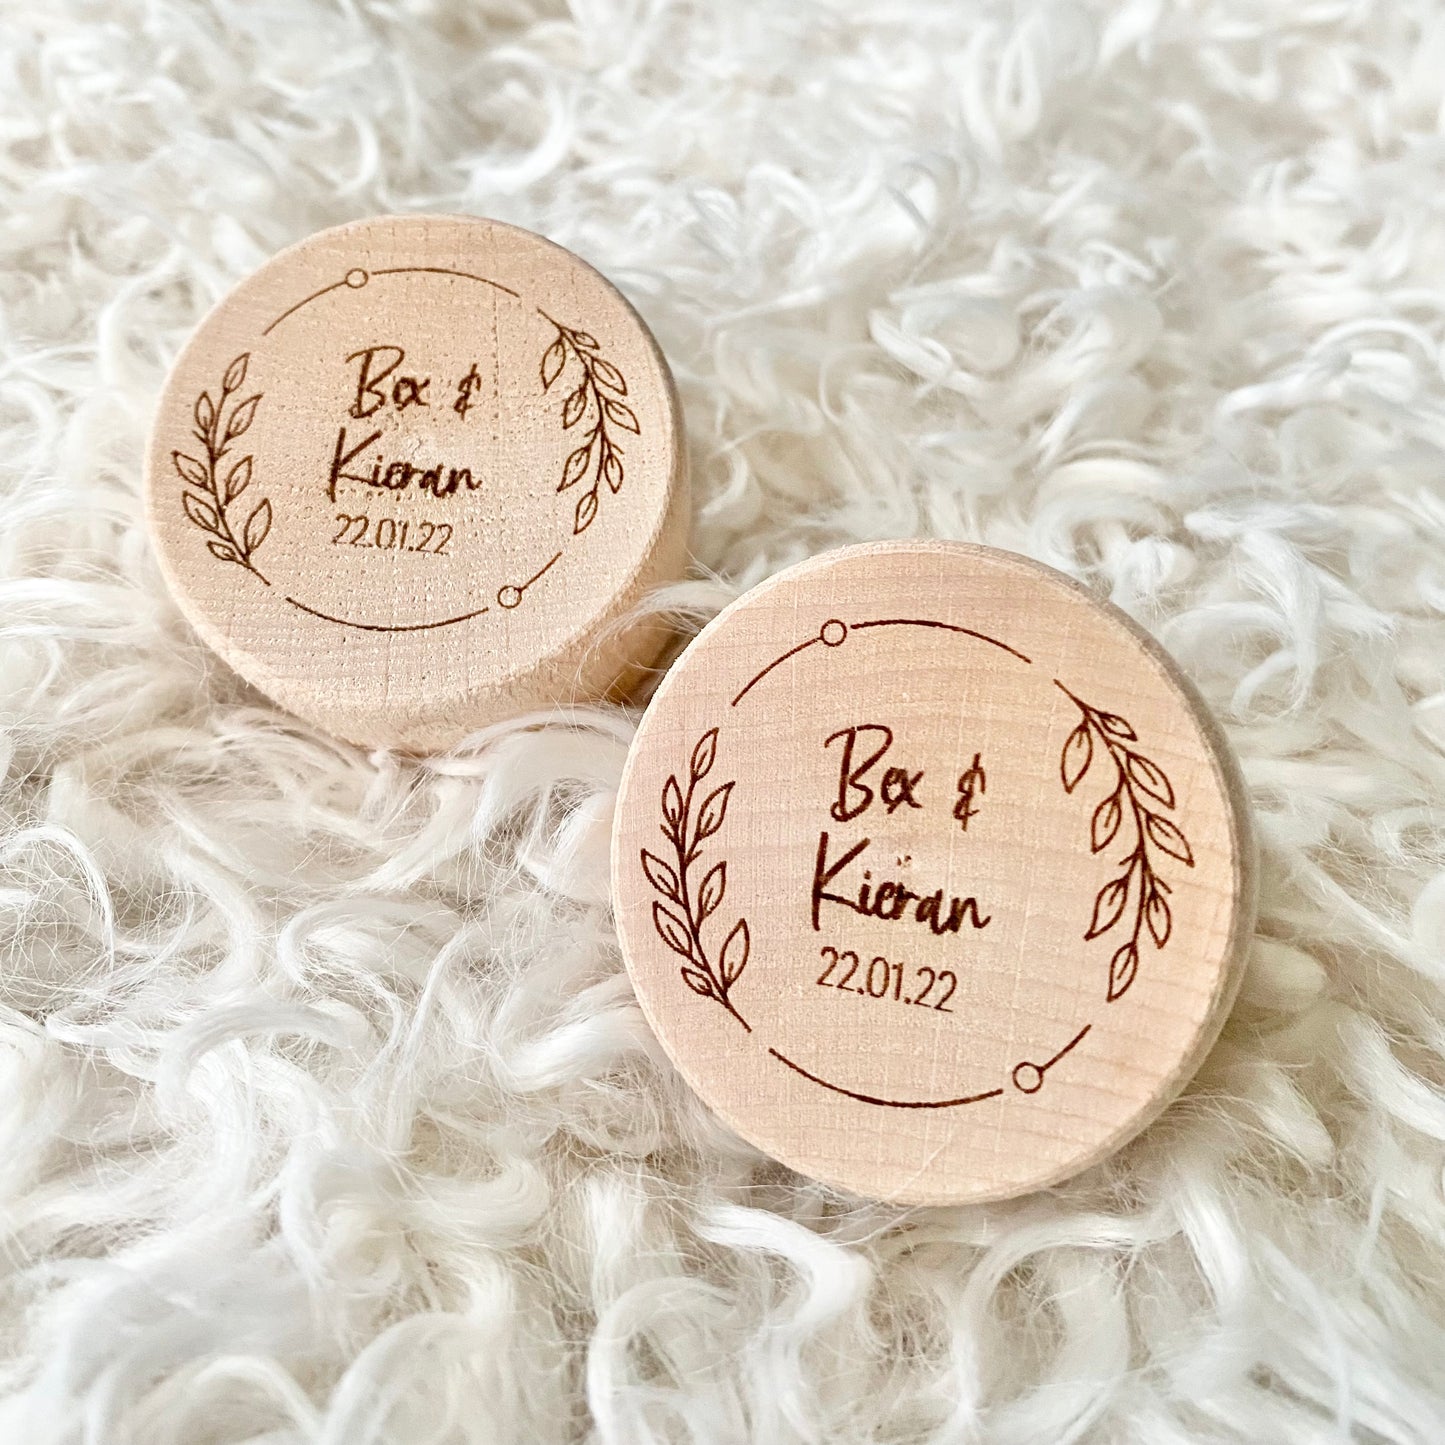 Couple ring box - wreath with names